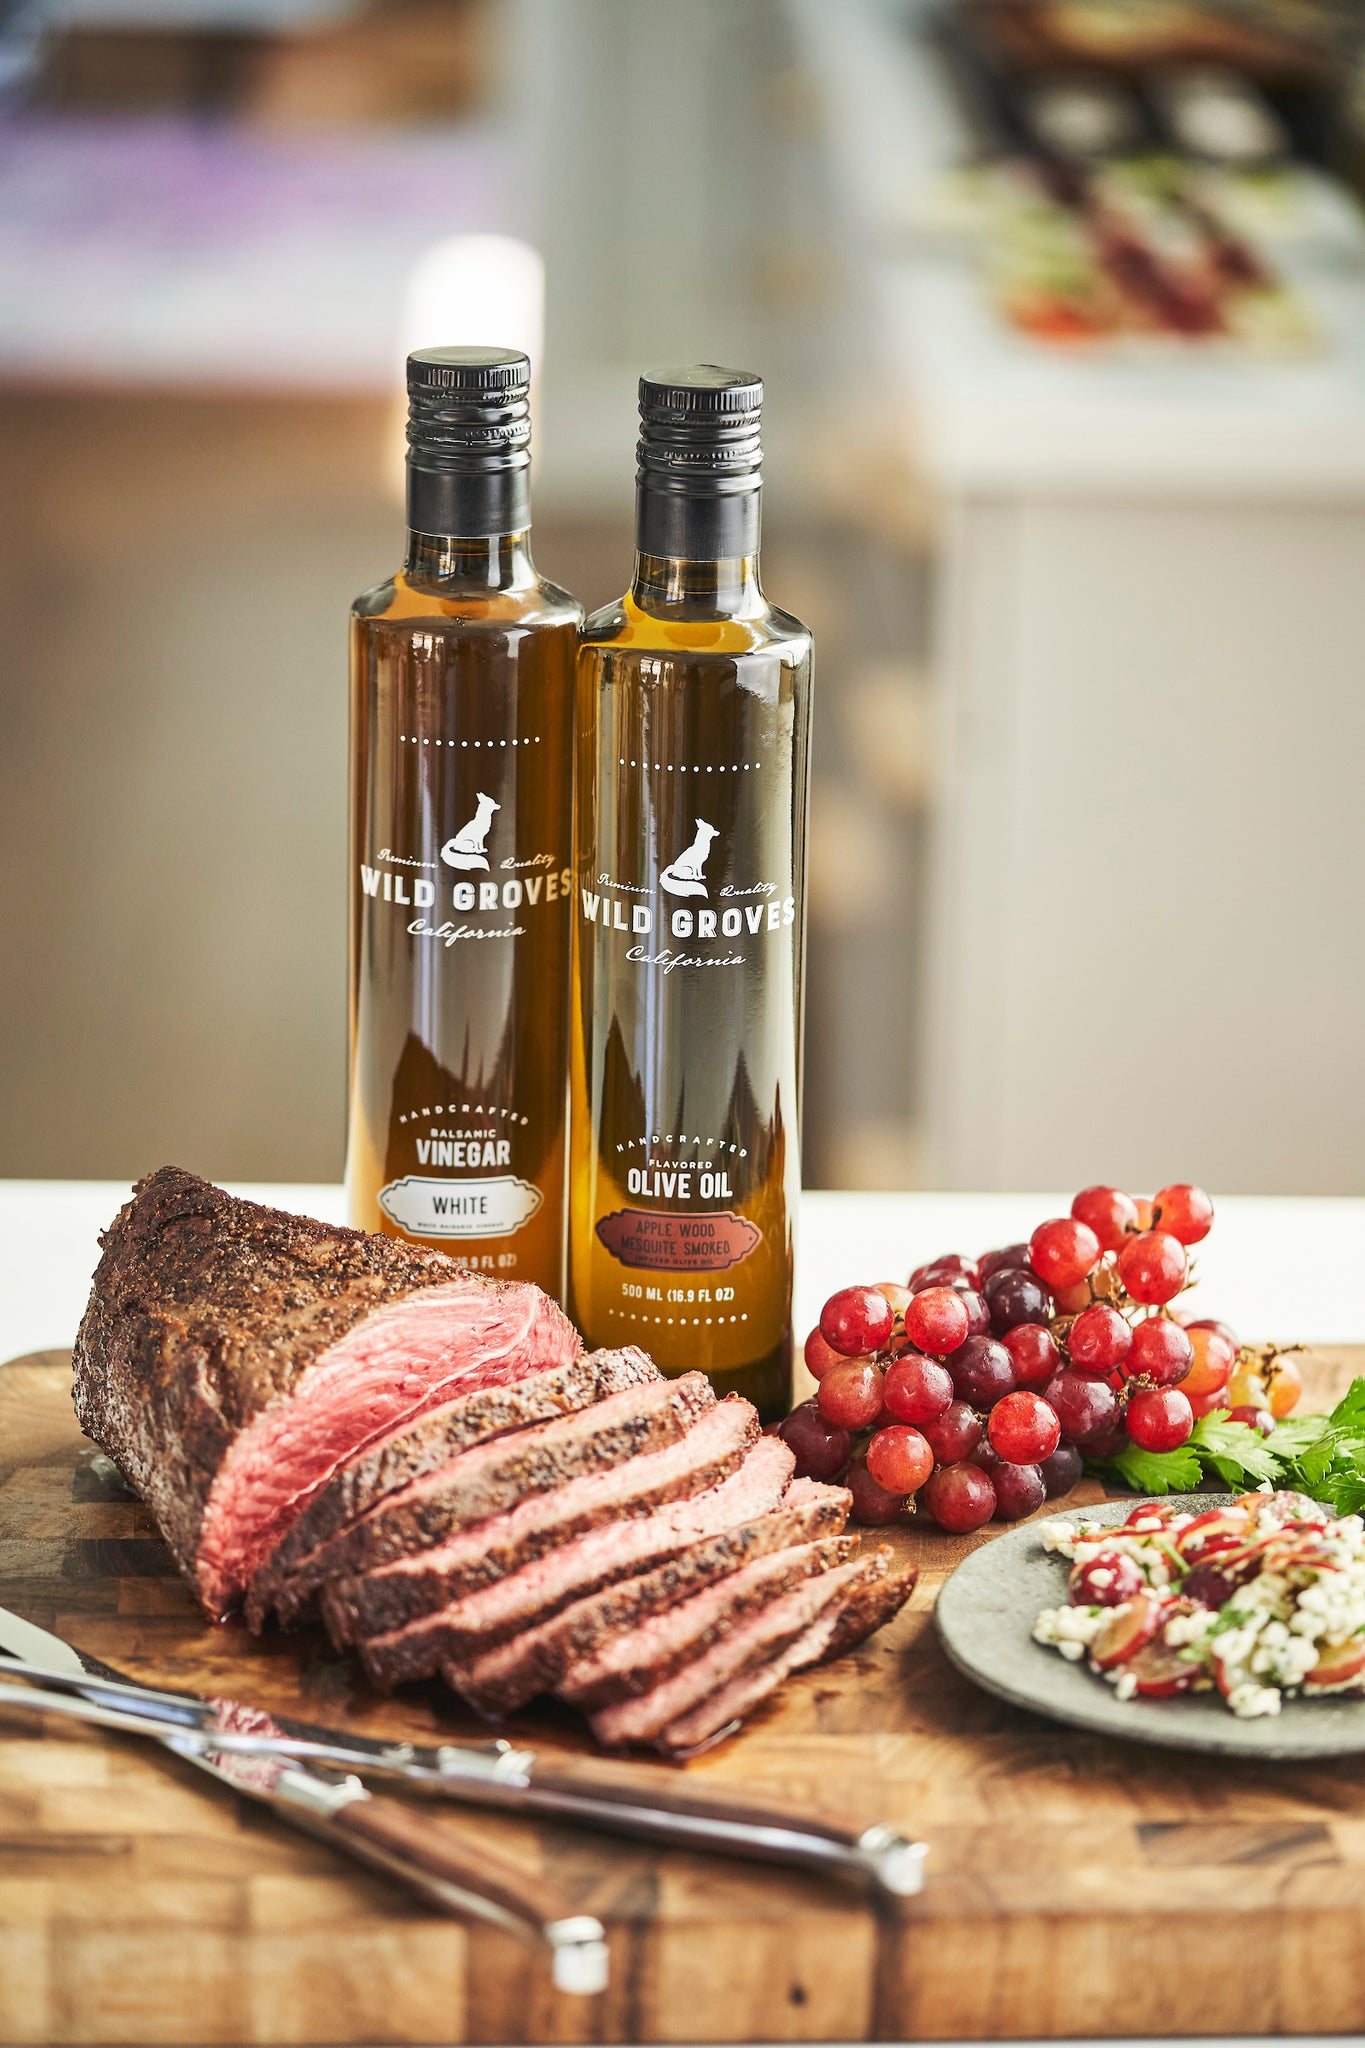 Apple Wood Mesquite Smoked Olive Oil